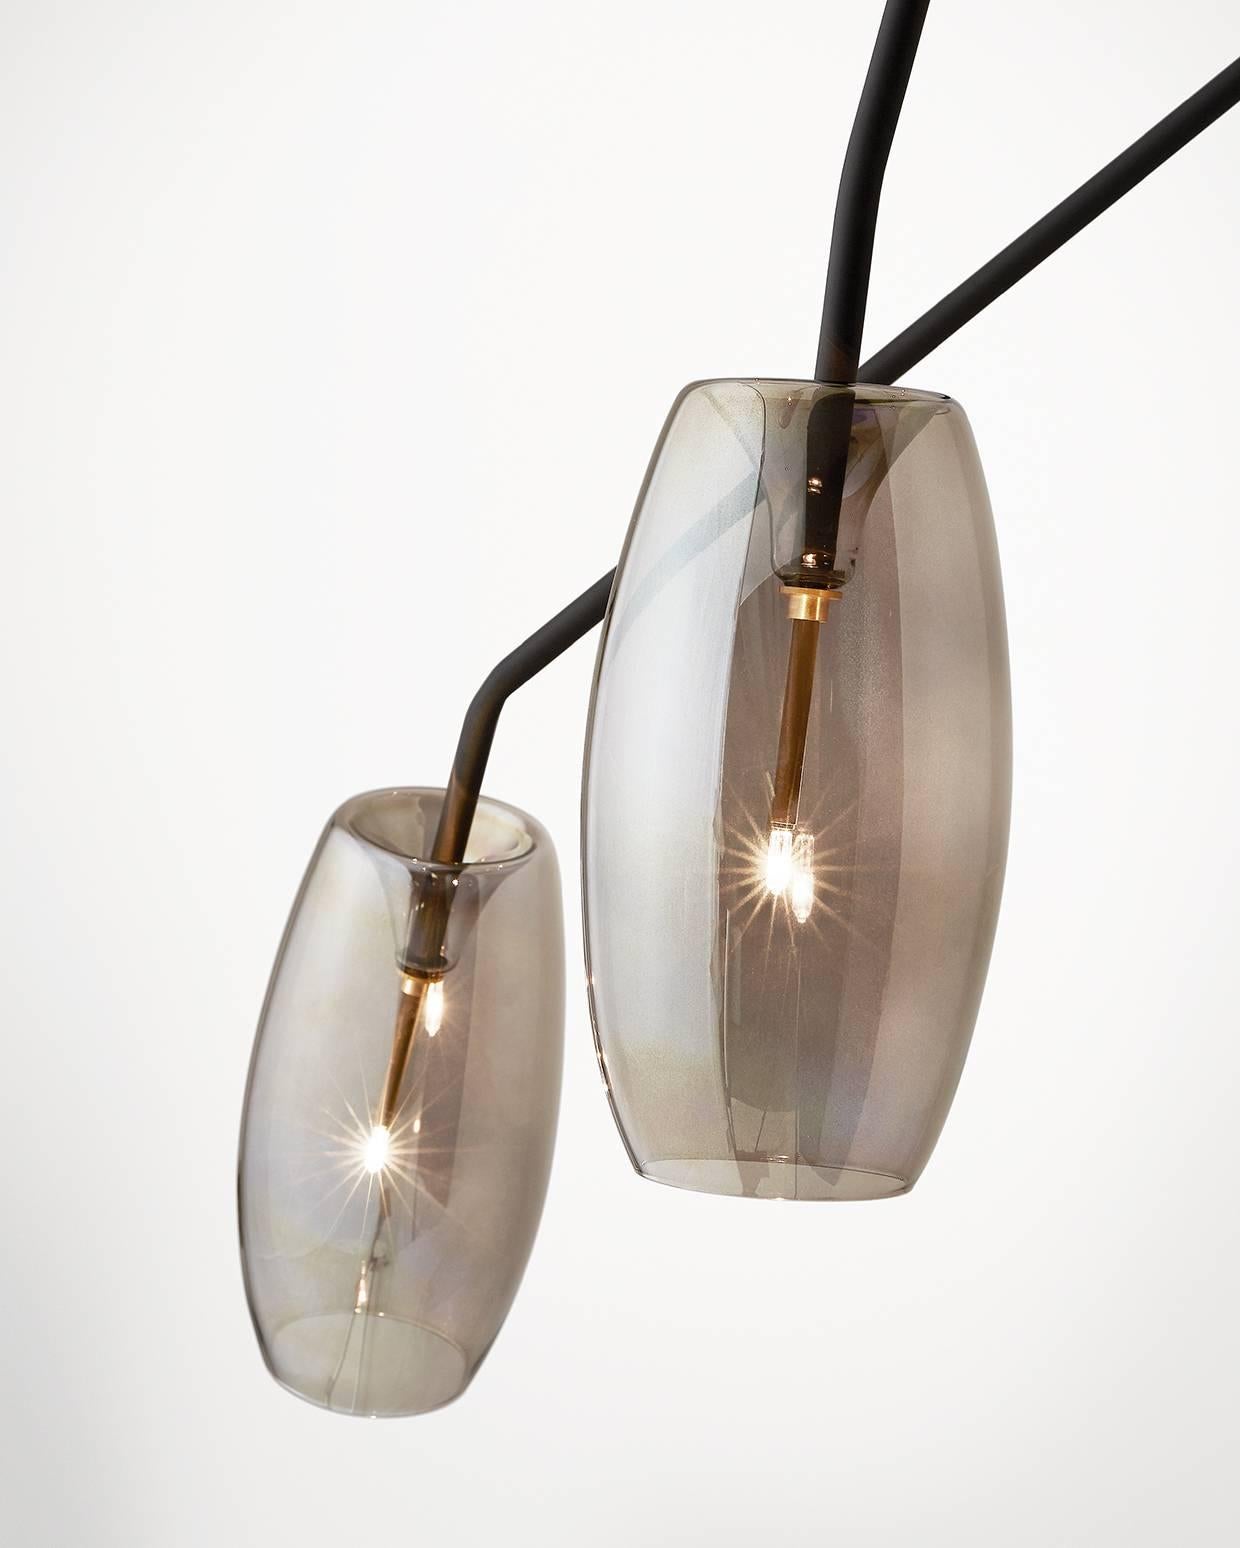 Modern Diantha Chandelier DH, Gallotti & Radice with Mouth Blown Glass & Bronzed Metal For Sale